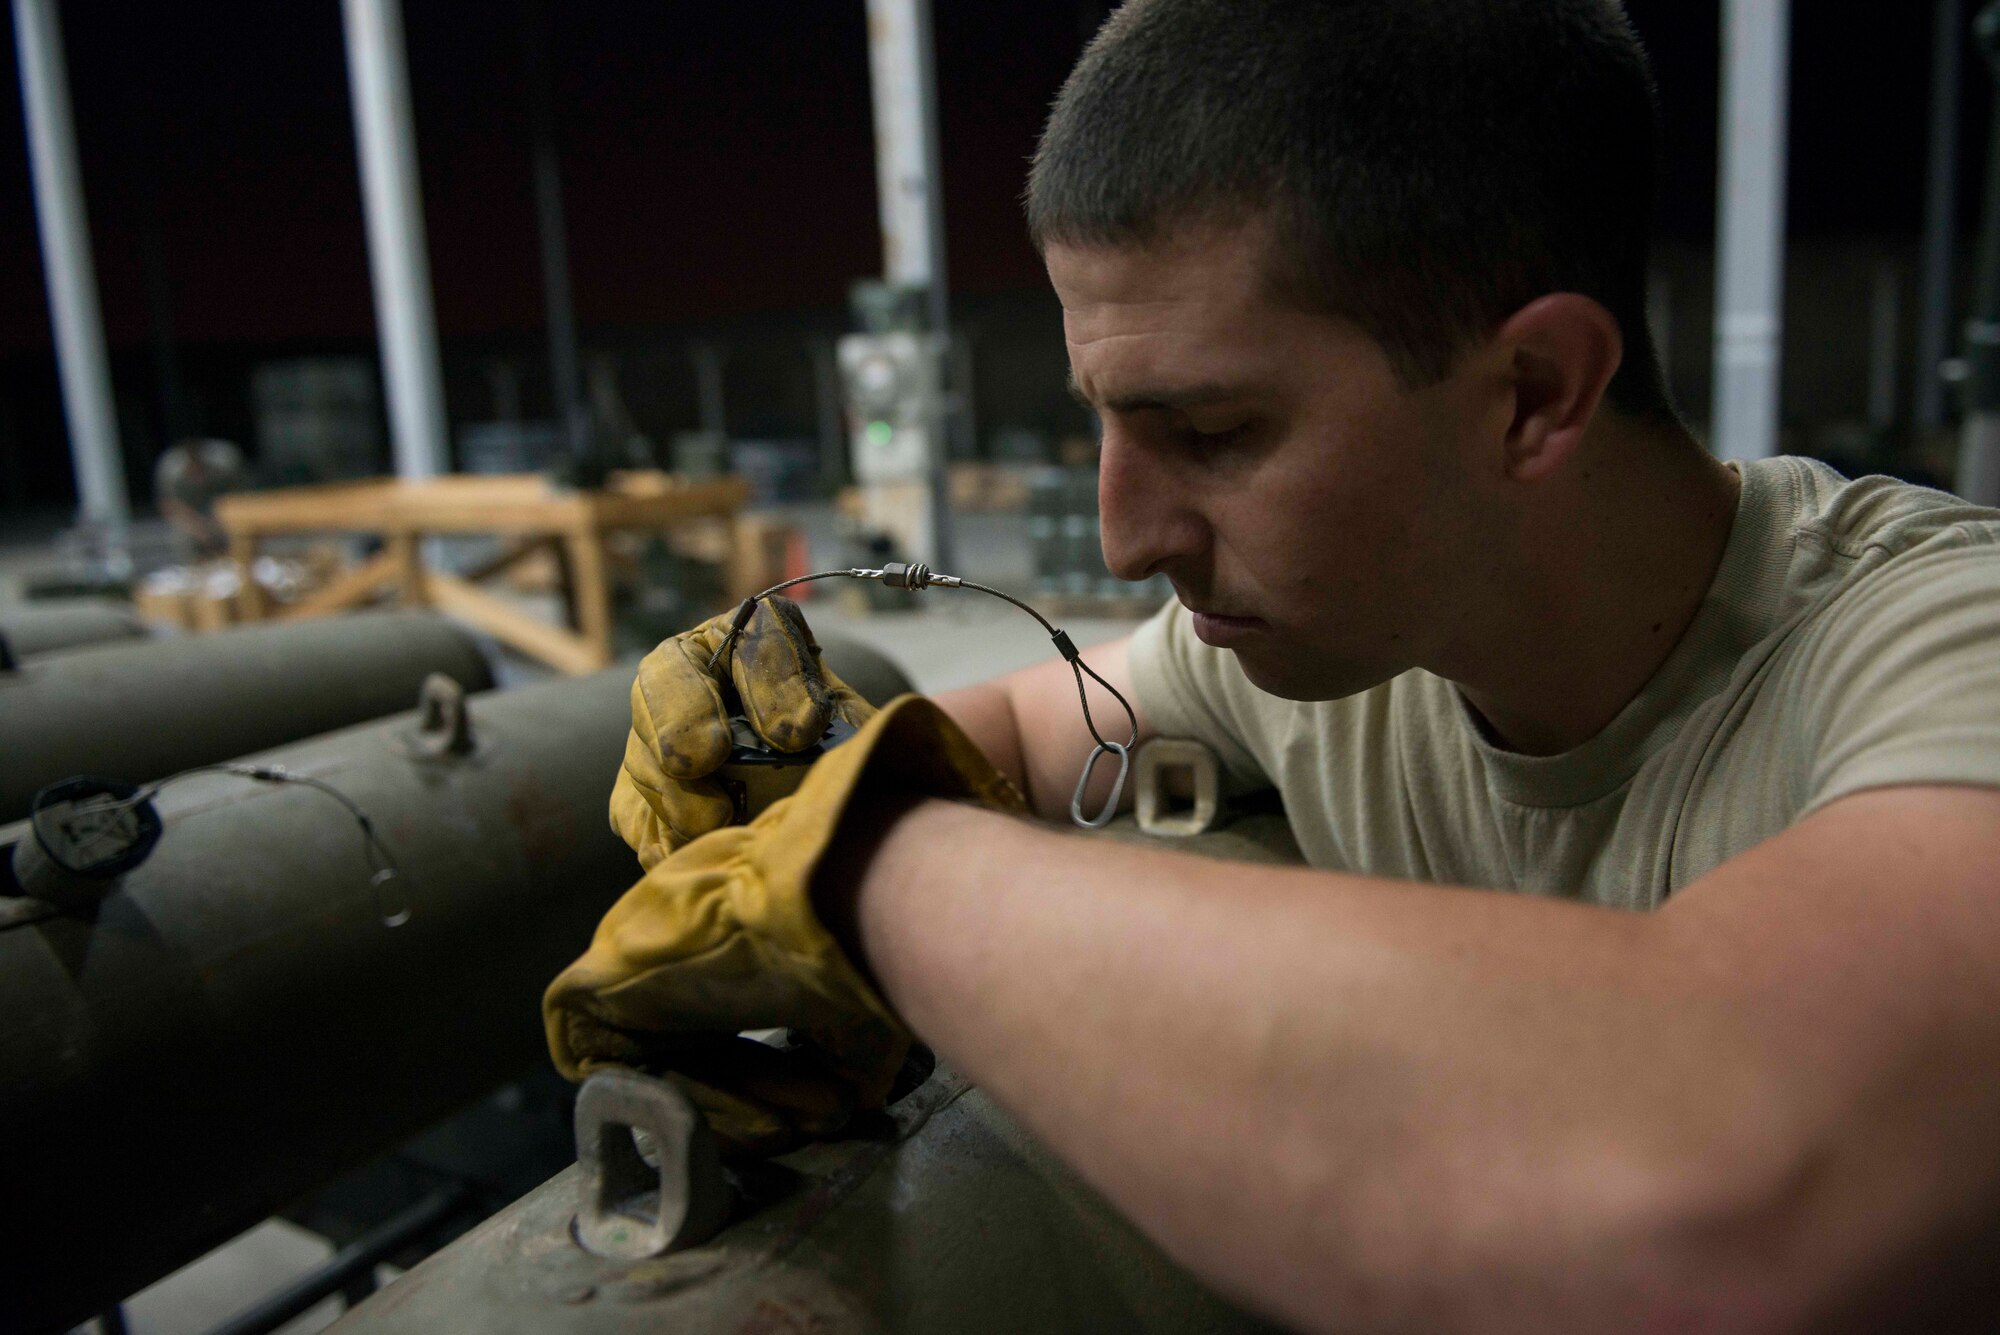 U.S. Air Force Staff Sgt. Curtis Downer, 447th Expeditionary Aircraft Maintenance Squadron munitions systems specialist, installs a part onto a GBU-12 Paveway II laser-guided bomb Aug. 8, 2016, at Incirlik Air Base, Turkey. Munitions systems specialists inspect, deliver and maintain guided and unguided non-nuclear munitions. (U.S. Air Force photo by Senior Airman John Nieves Camacho)